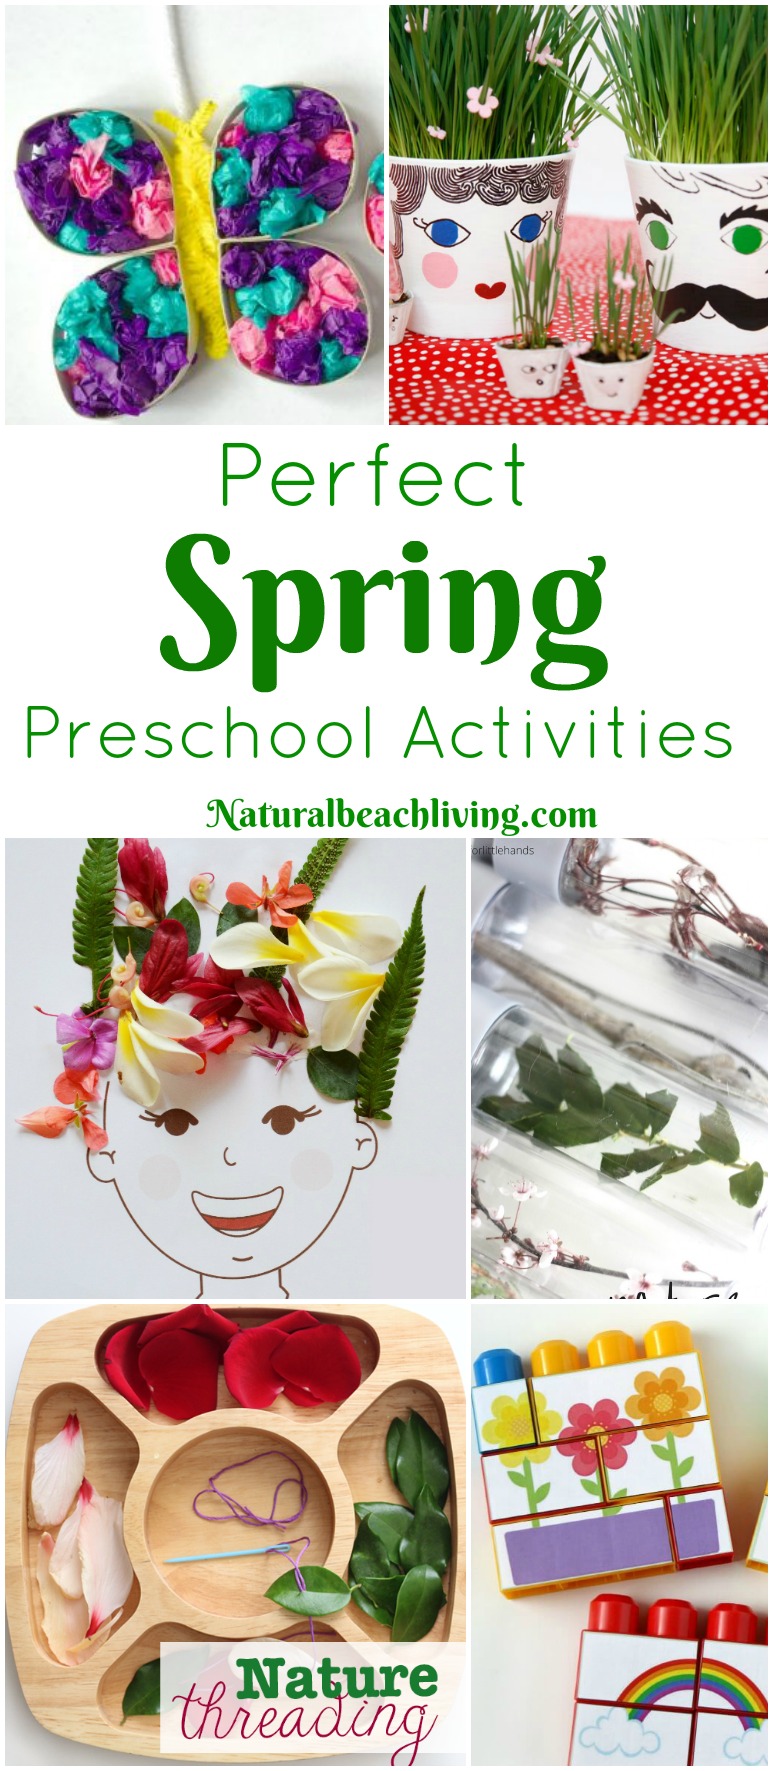 The Best Spring Preschool Themes and Lesson Plans, Free Printables, Life cycles for kids, Flower activities, Farm activities for preschool, Preschool books, Pond Theme, Animal habitats, preschool themes, Fun Preschool Themes, List of Spring Preschool Themes, Find The Best Preschool Themes and activities here 